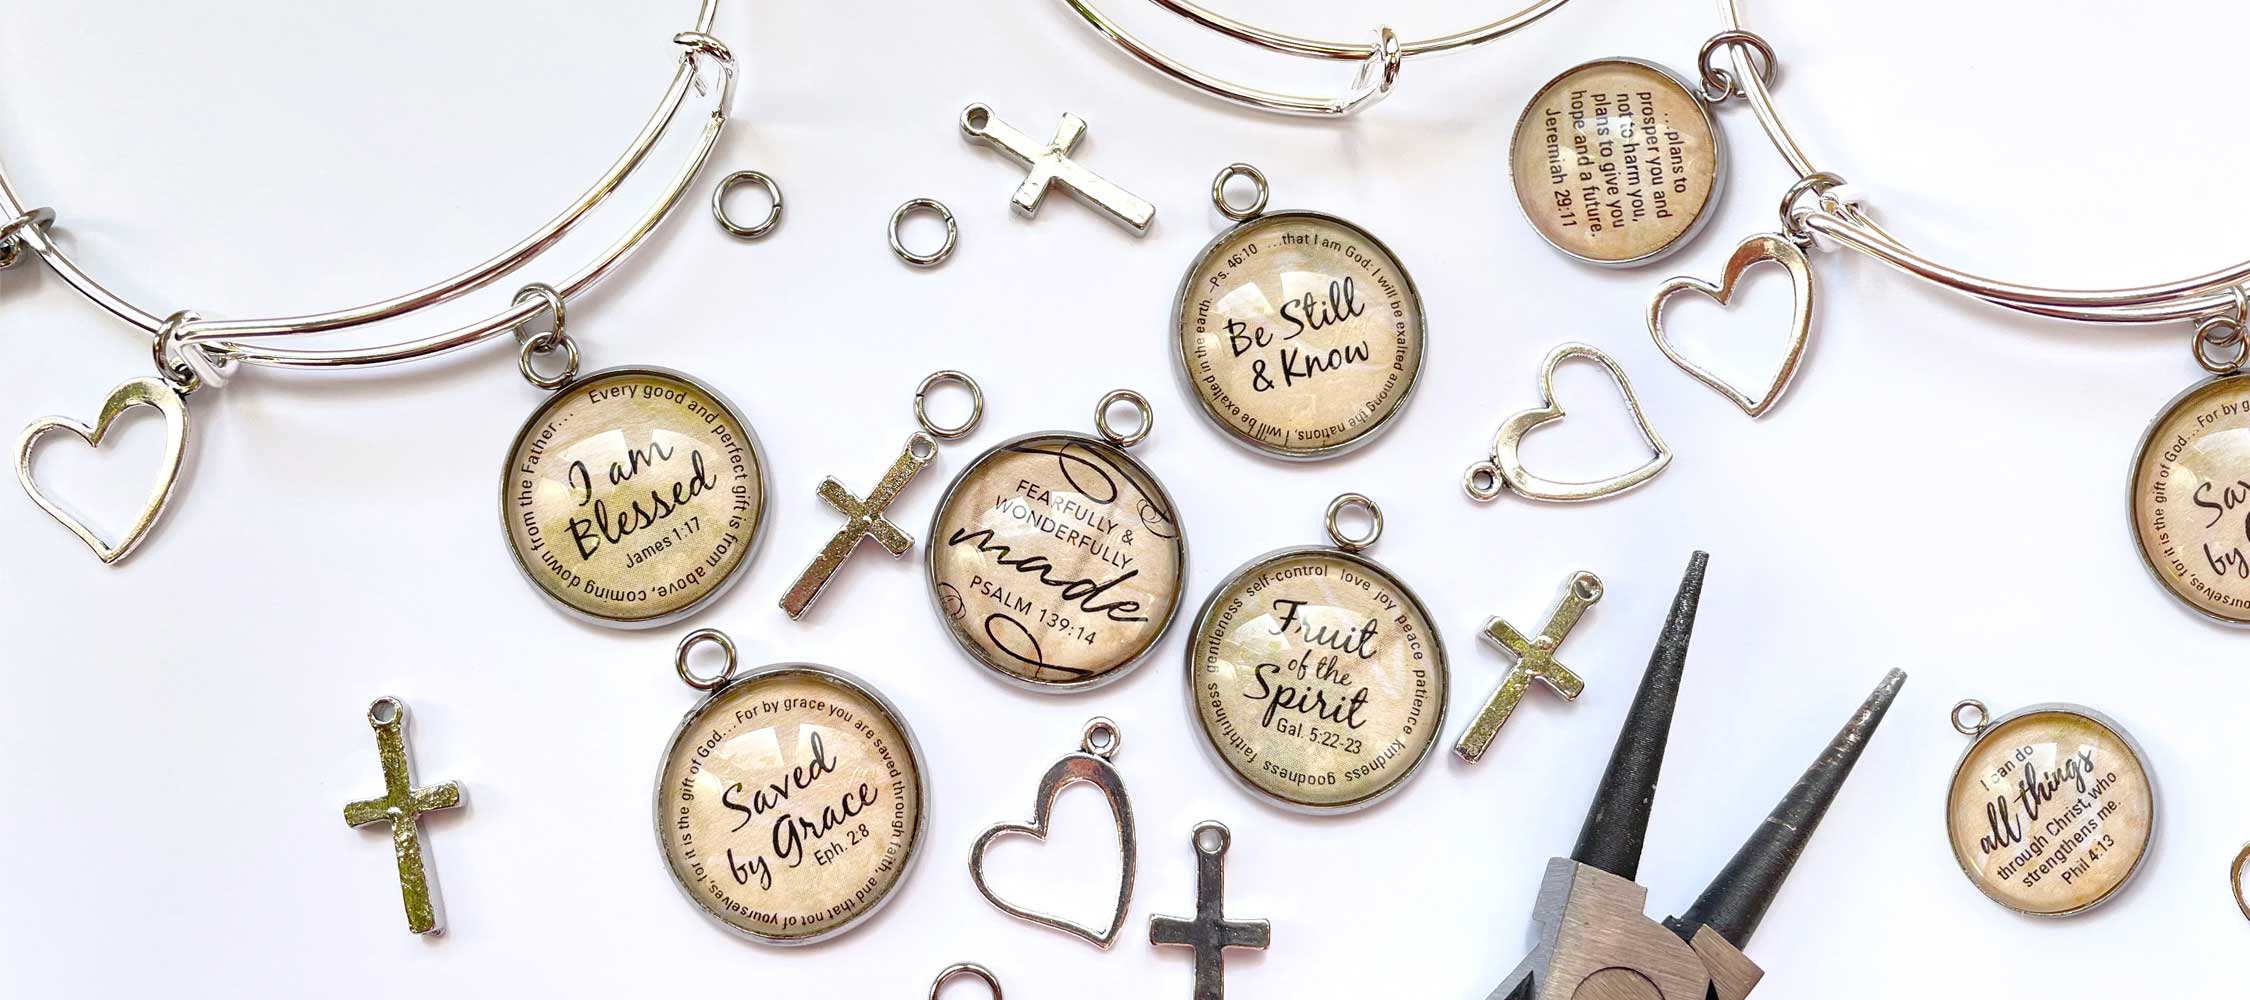 Have Fun Creating Your Own Meaningful Jewelry! – ScriptCharms - Scripture  Jewelry & Charms